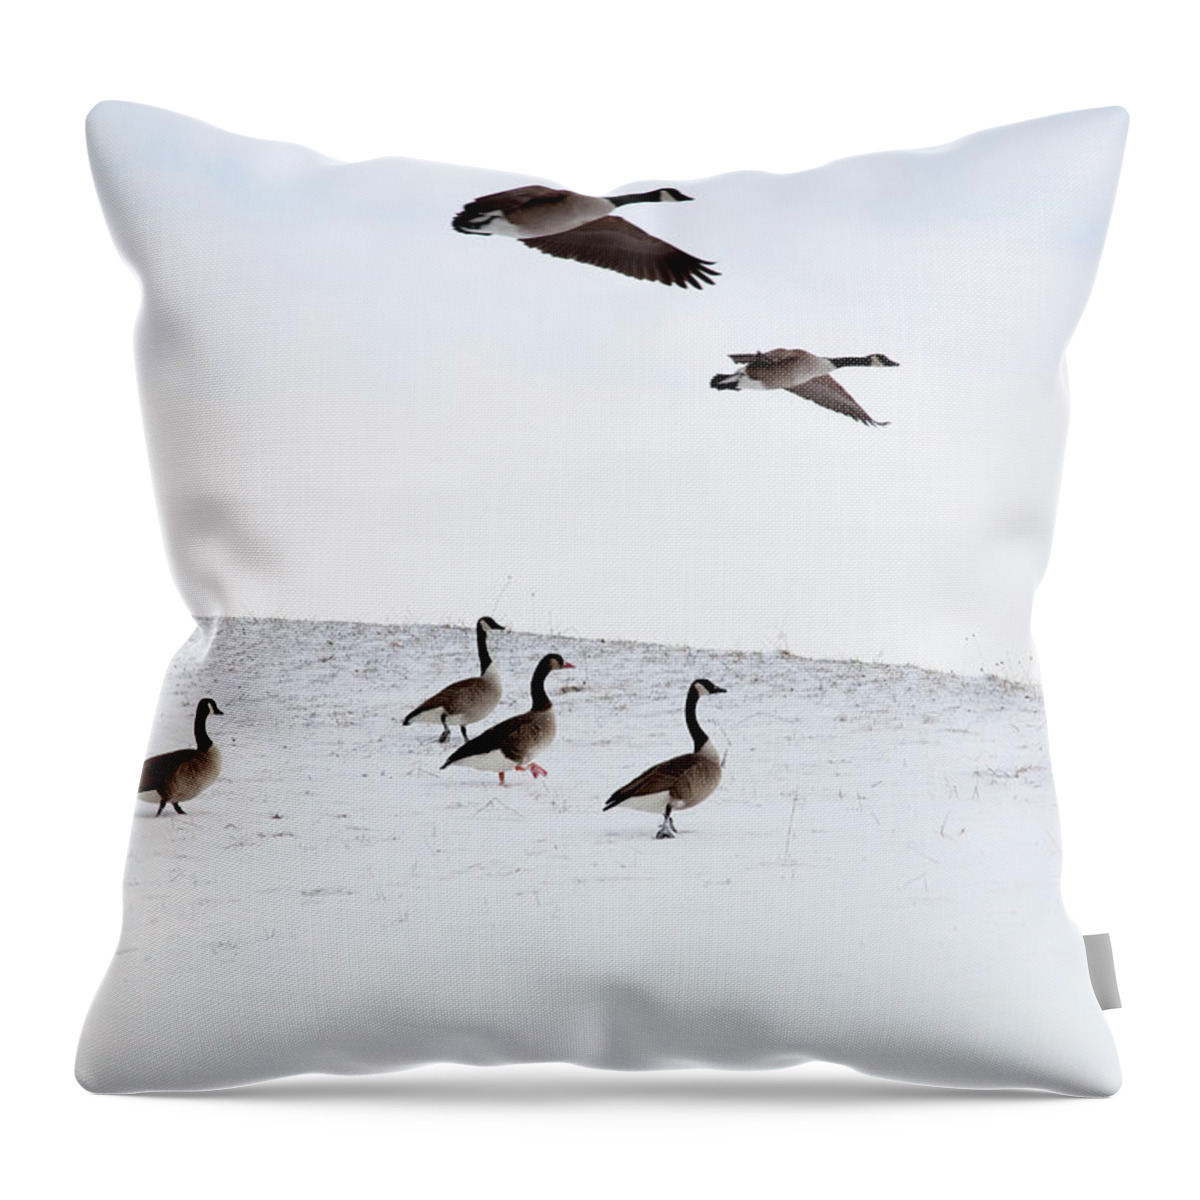 Snow Throw Pillow featuring the photograph Flying Geese In Snowy Landscape by Henglein And Steets